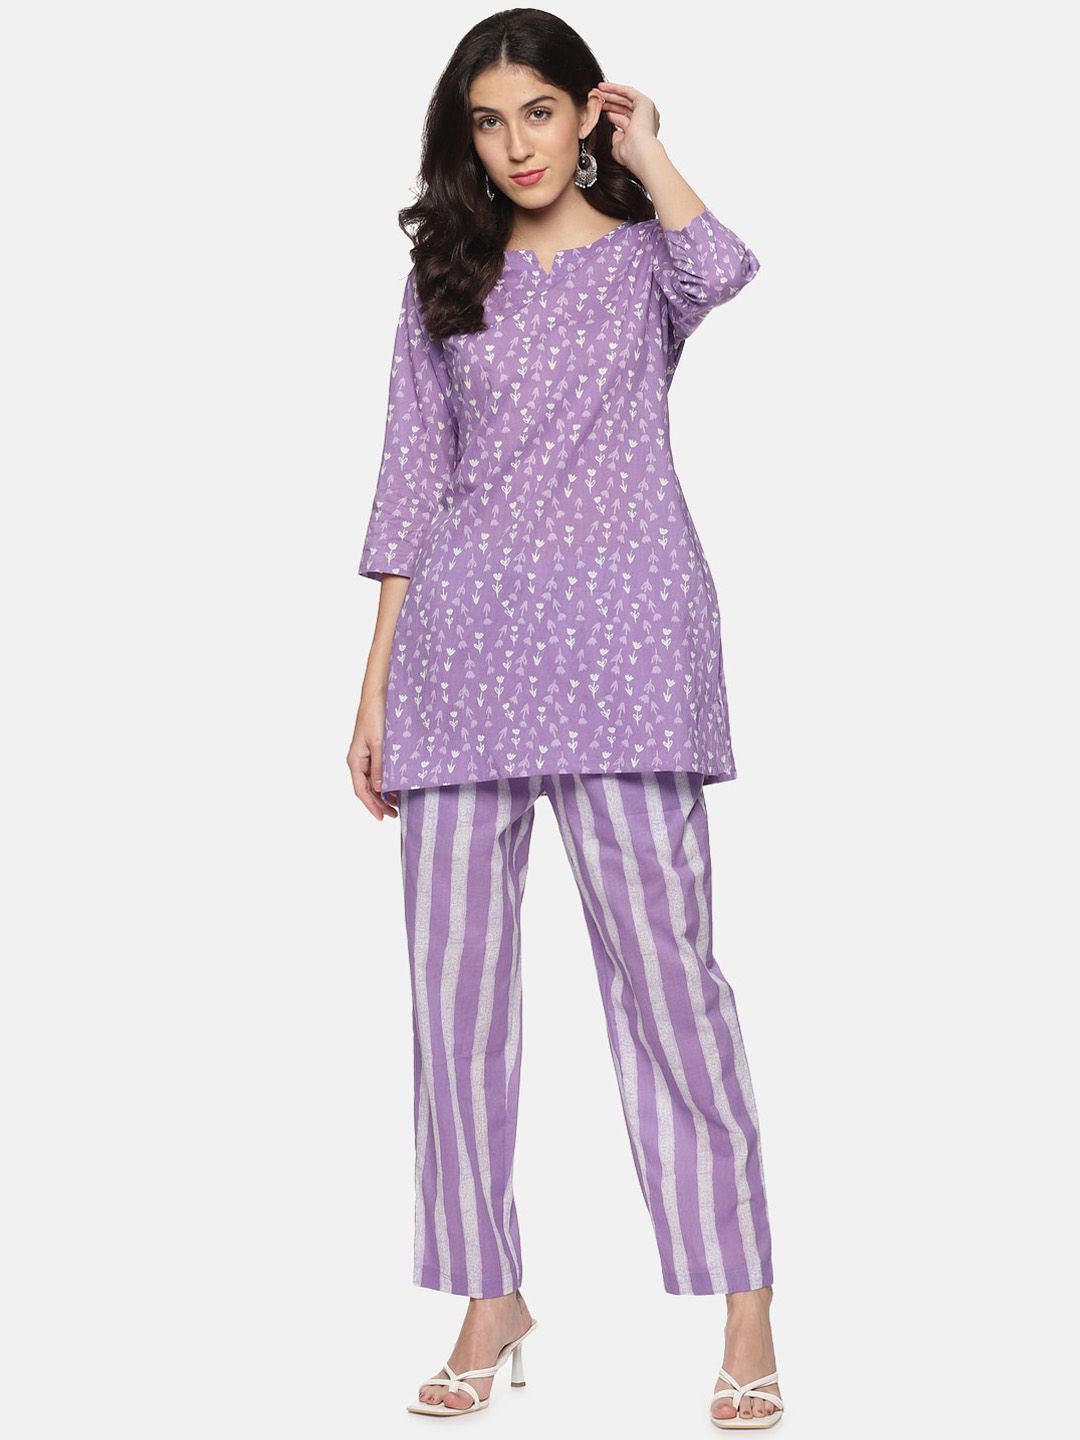 Palakh Women Purple & White Printed Night suit Price in India